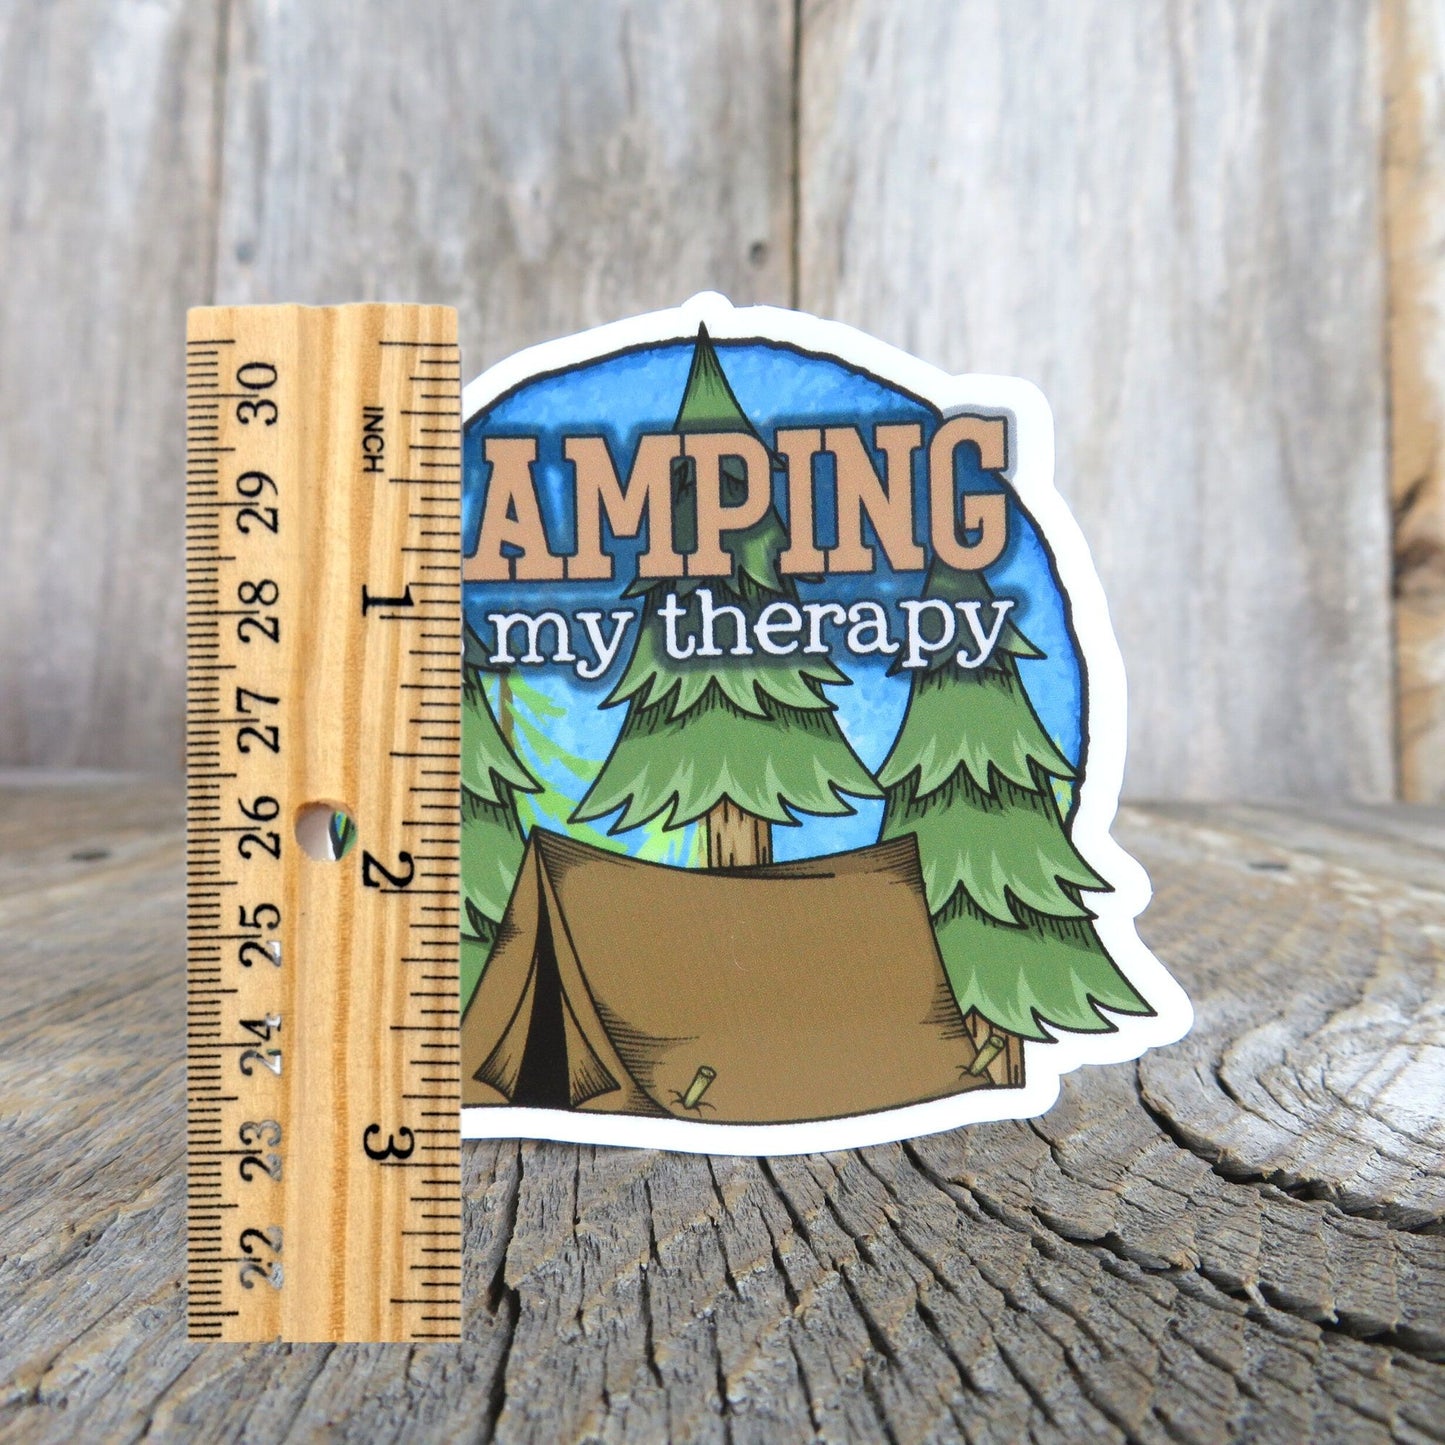 Camping is My Therapy Sticker Waterproof Tent Camping Outdoors Lover Relaxation